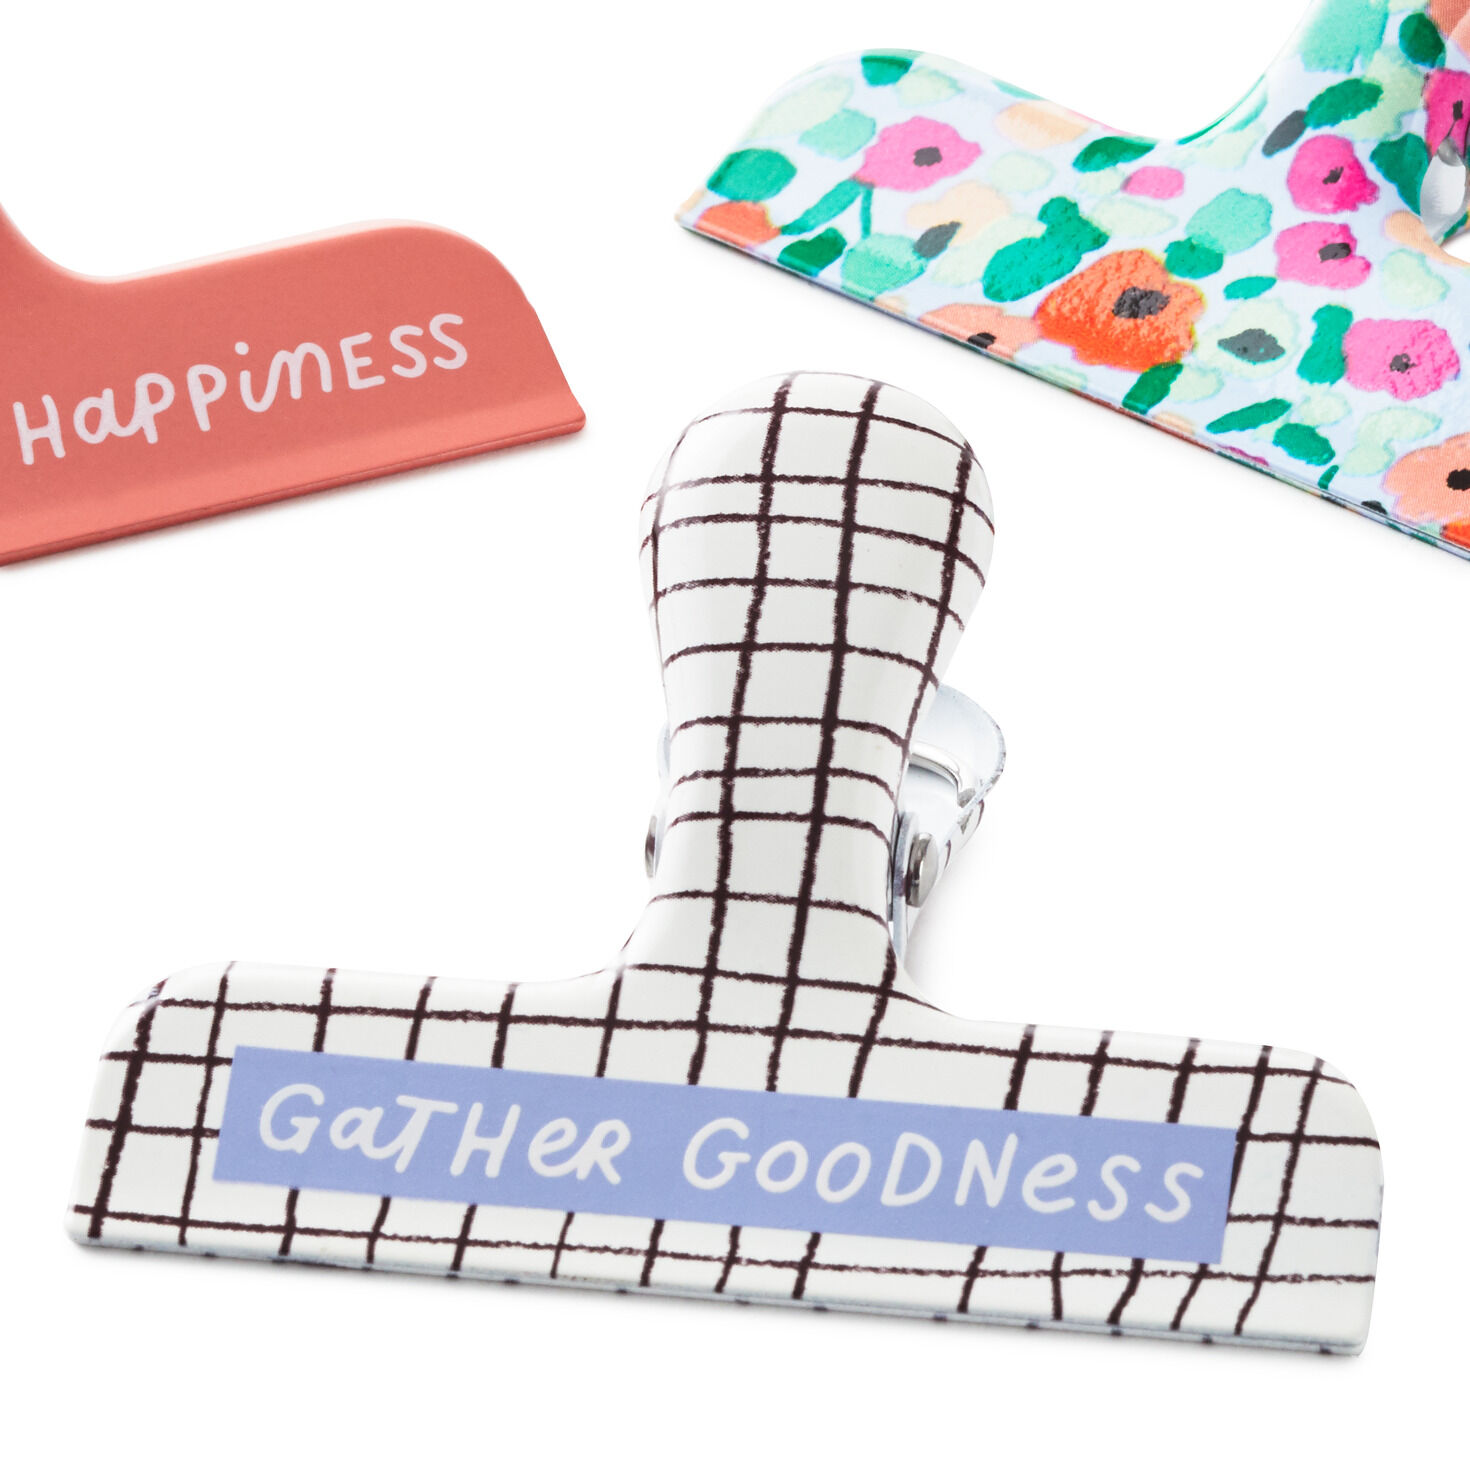 Gather Goodness Chip Clips, Set of 3 for only USD 12.99 | Hallmark